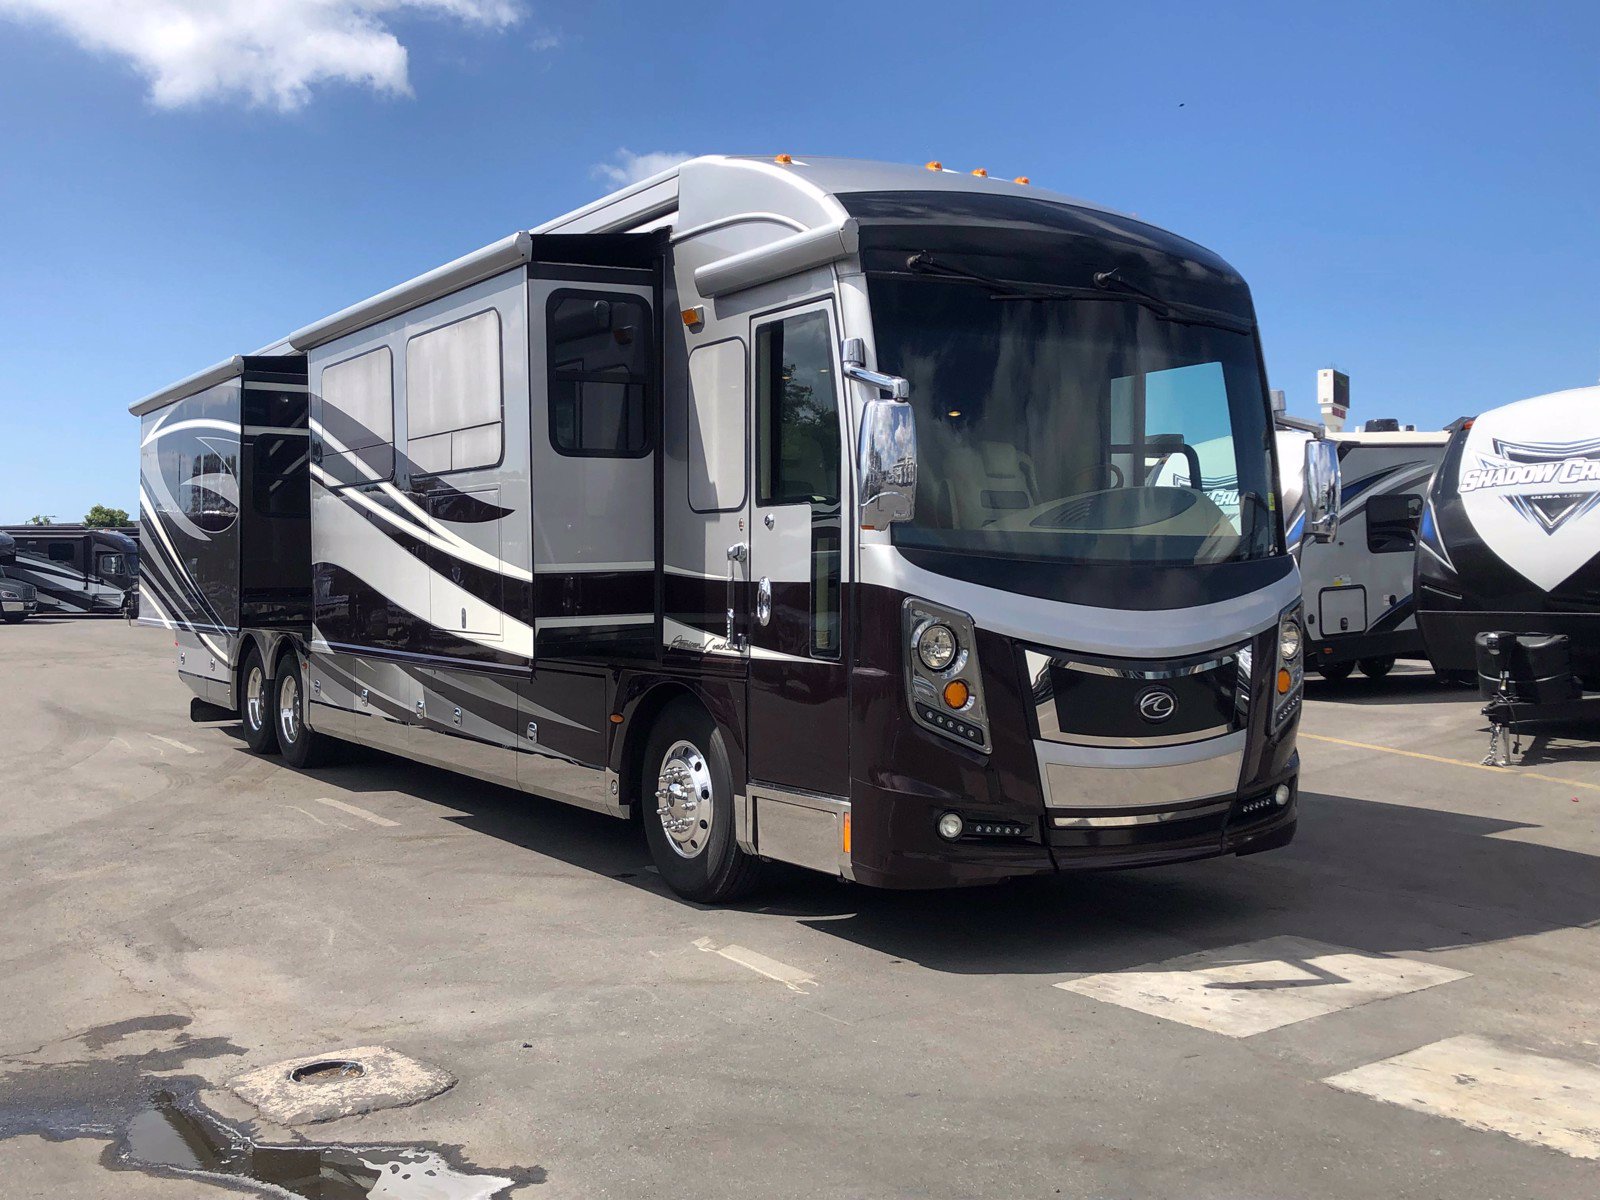 Pre-Owned 2014 AMERICAN HERITAGE 45T MH in Boise #C0647P | Dennis ...